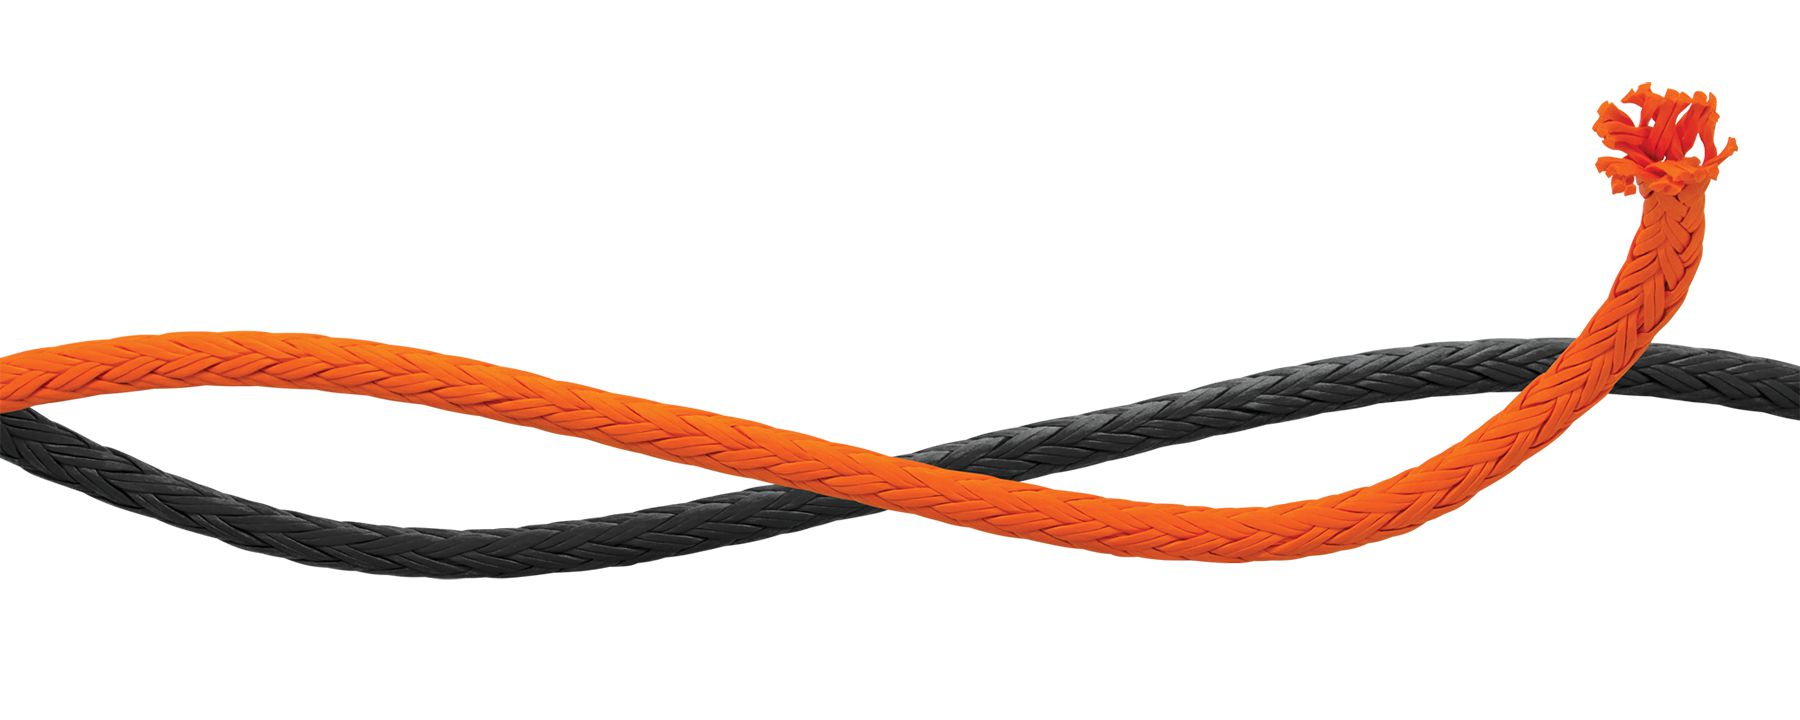 Southern Ropes; Rope Supplier & Rope Manufacturer